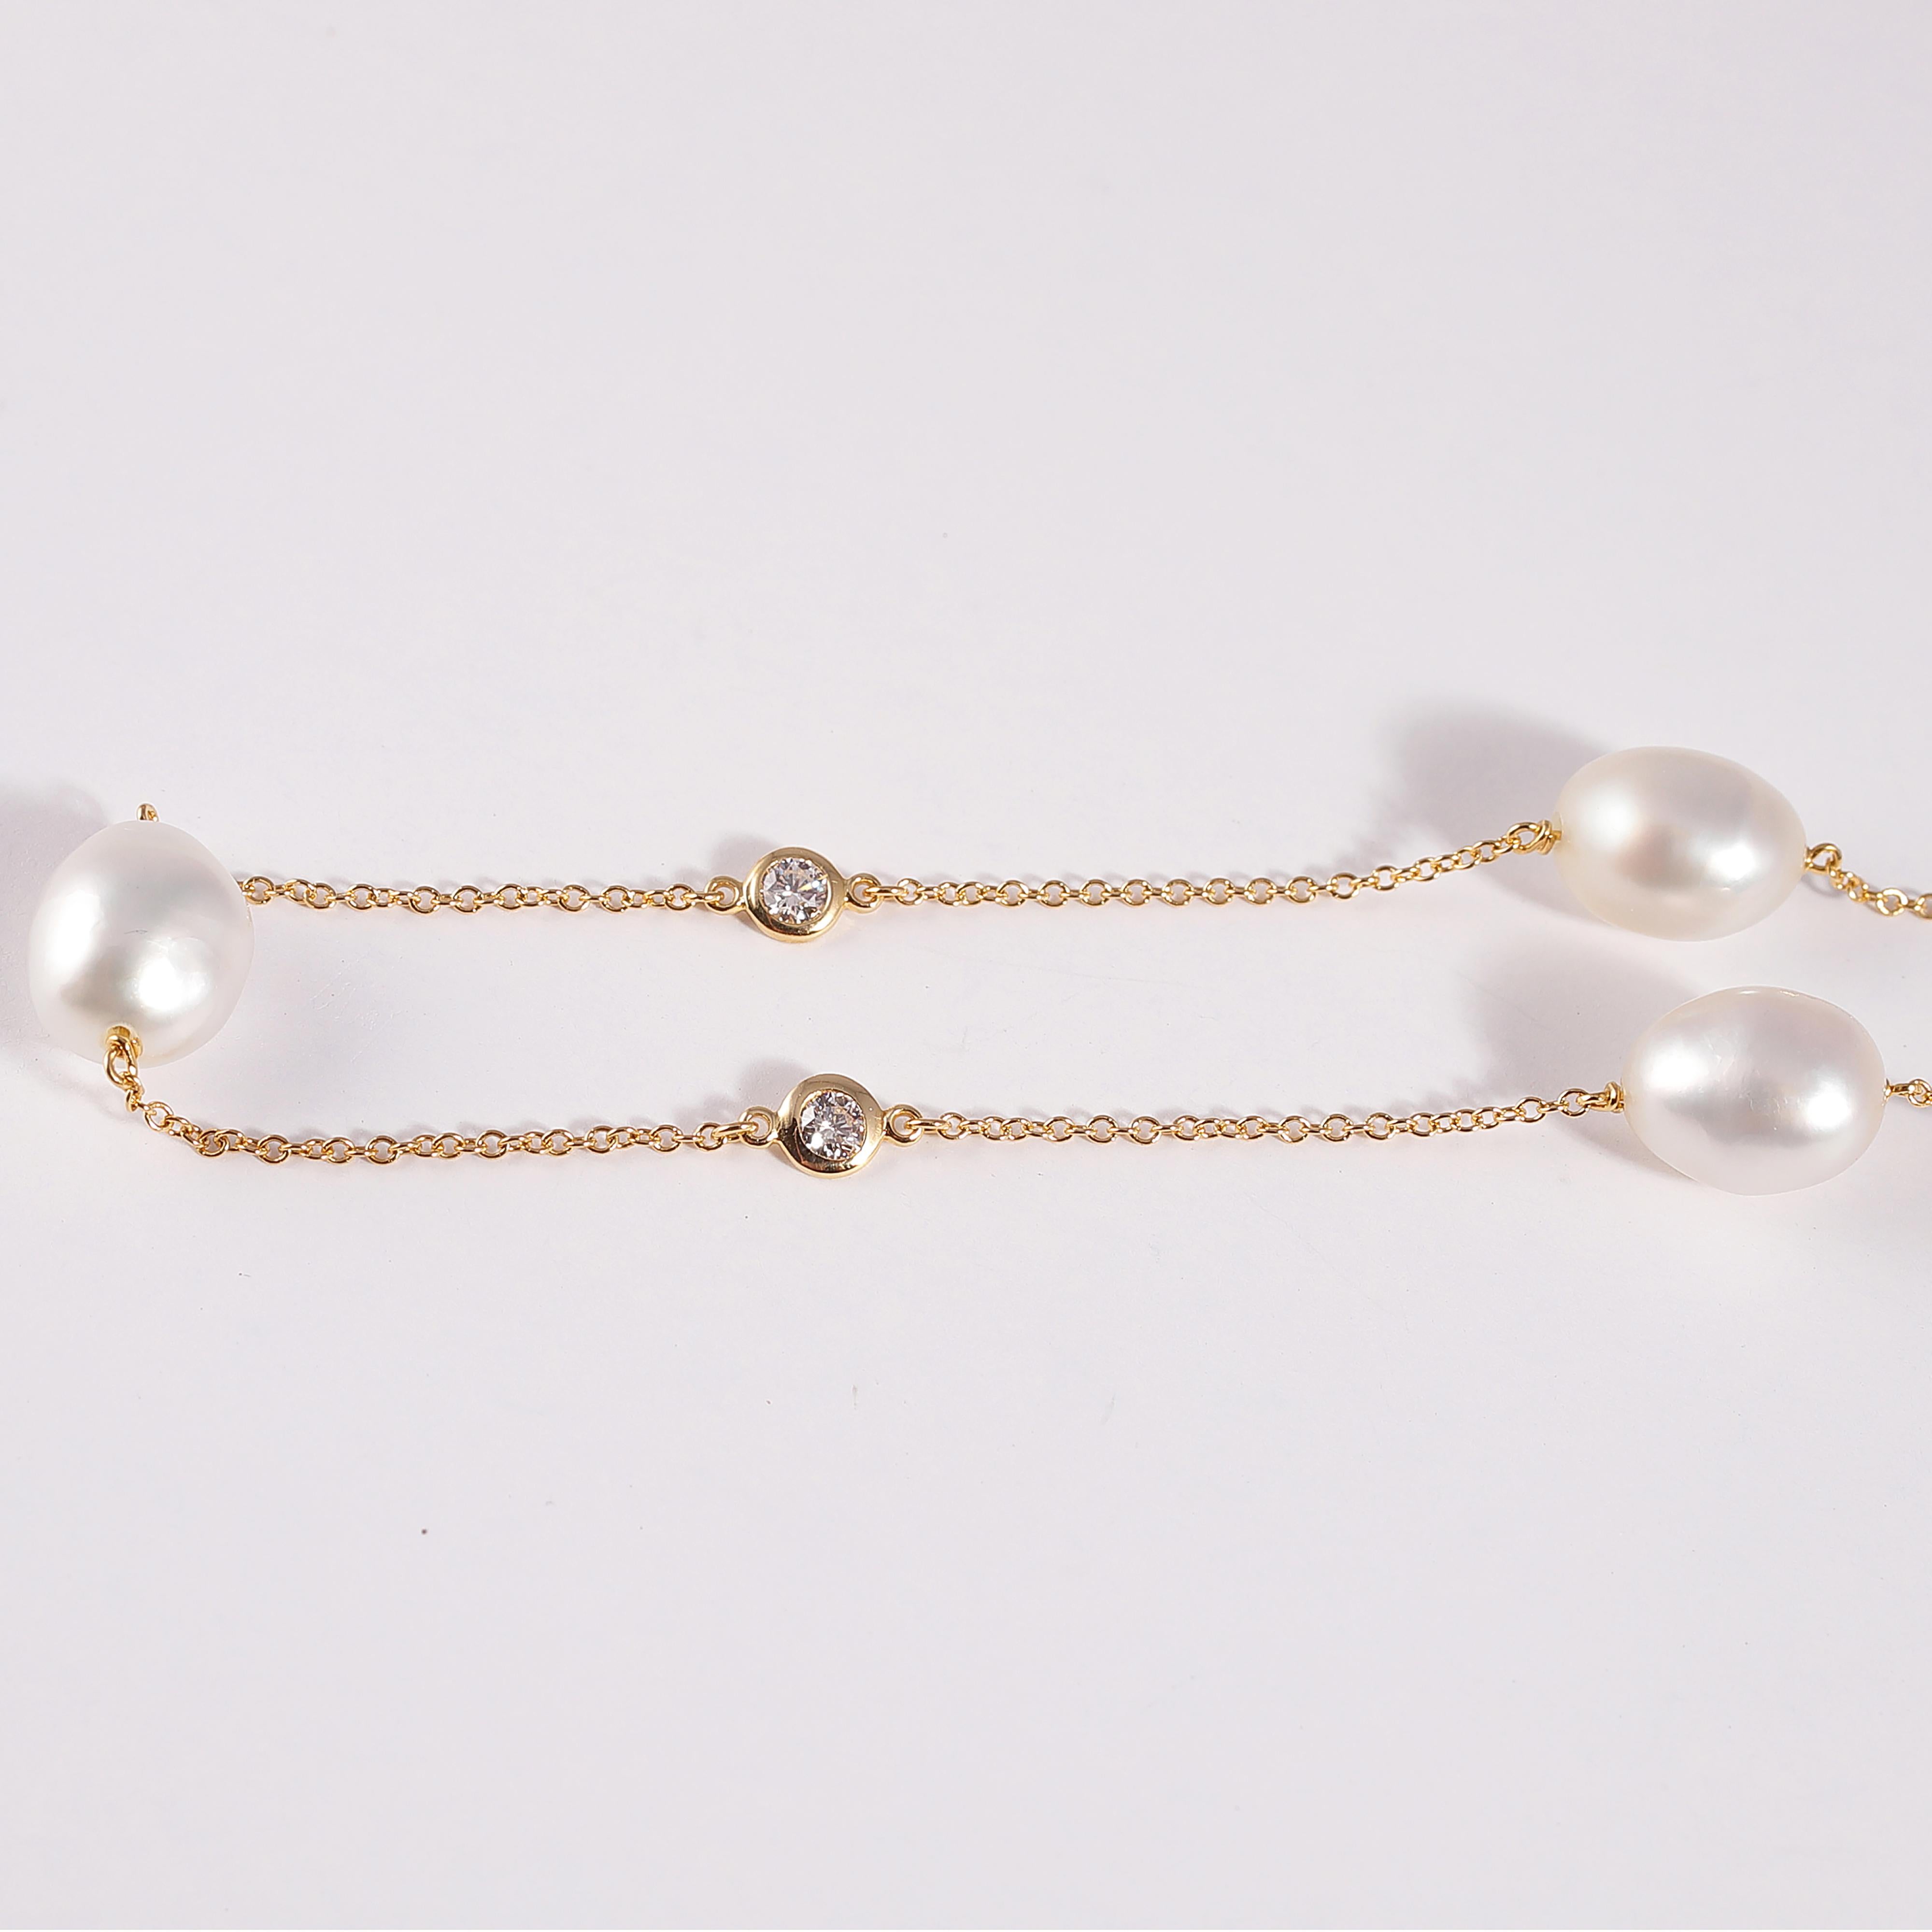 From famed designer Elsa Peretti for Tiffany & Co. this classic necklace features three Keshi pearls alternating with six bezel-set, found brilliant diamonds.